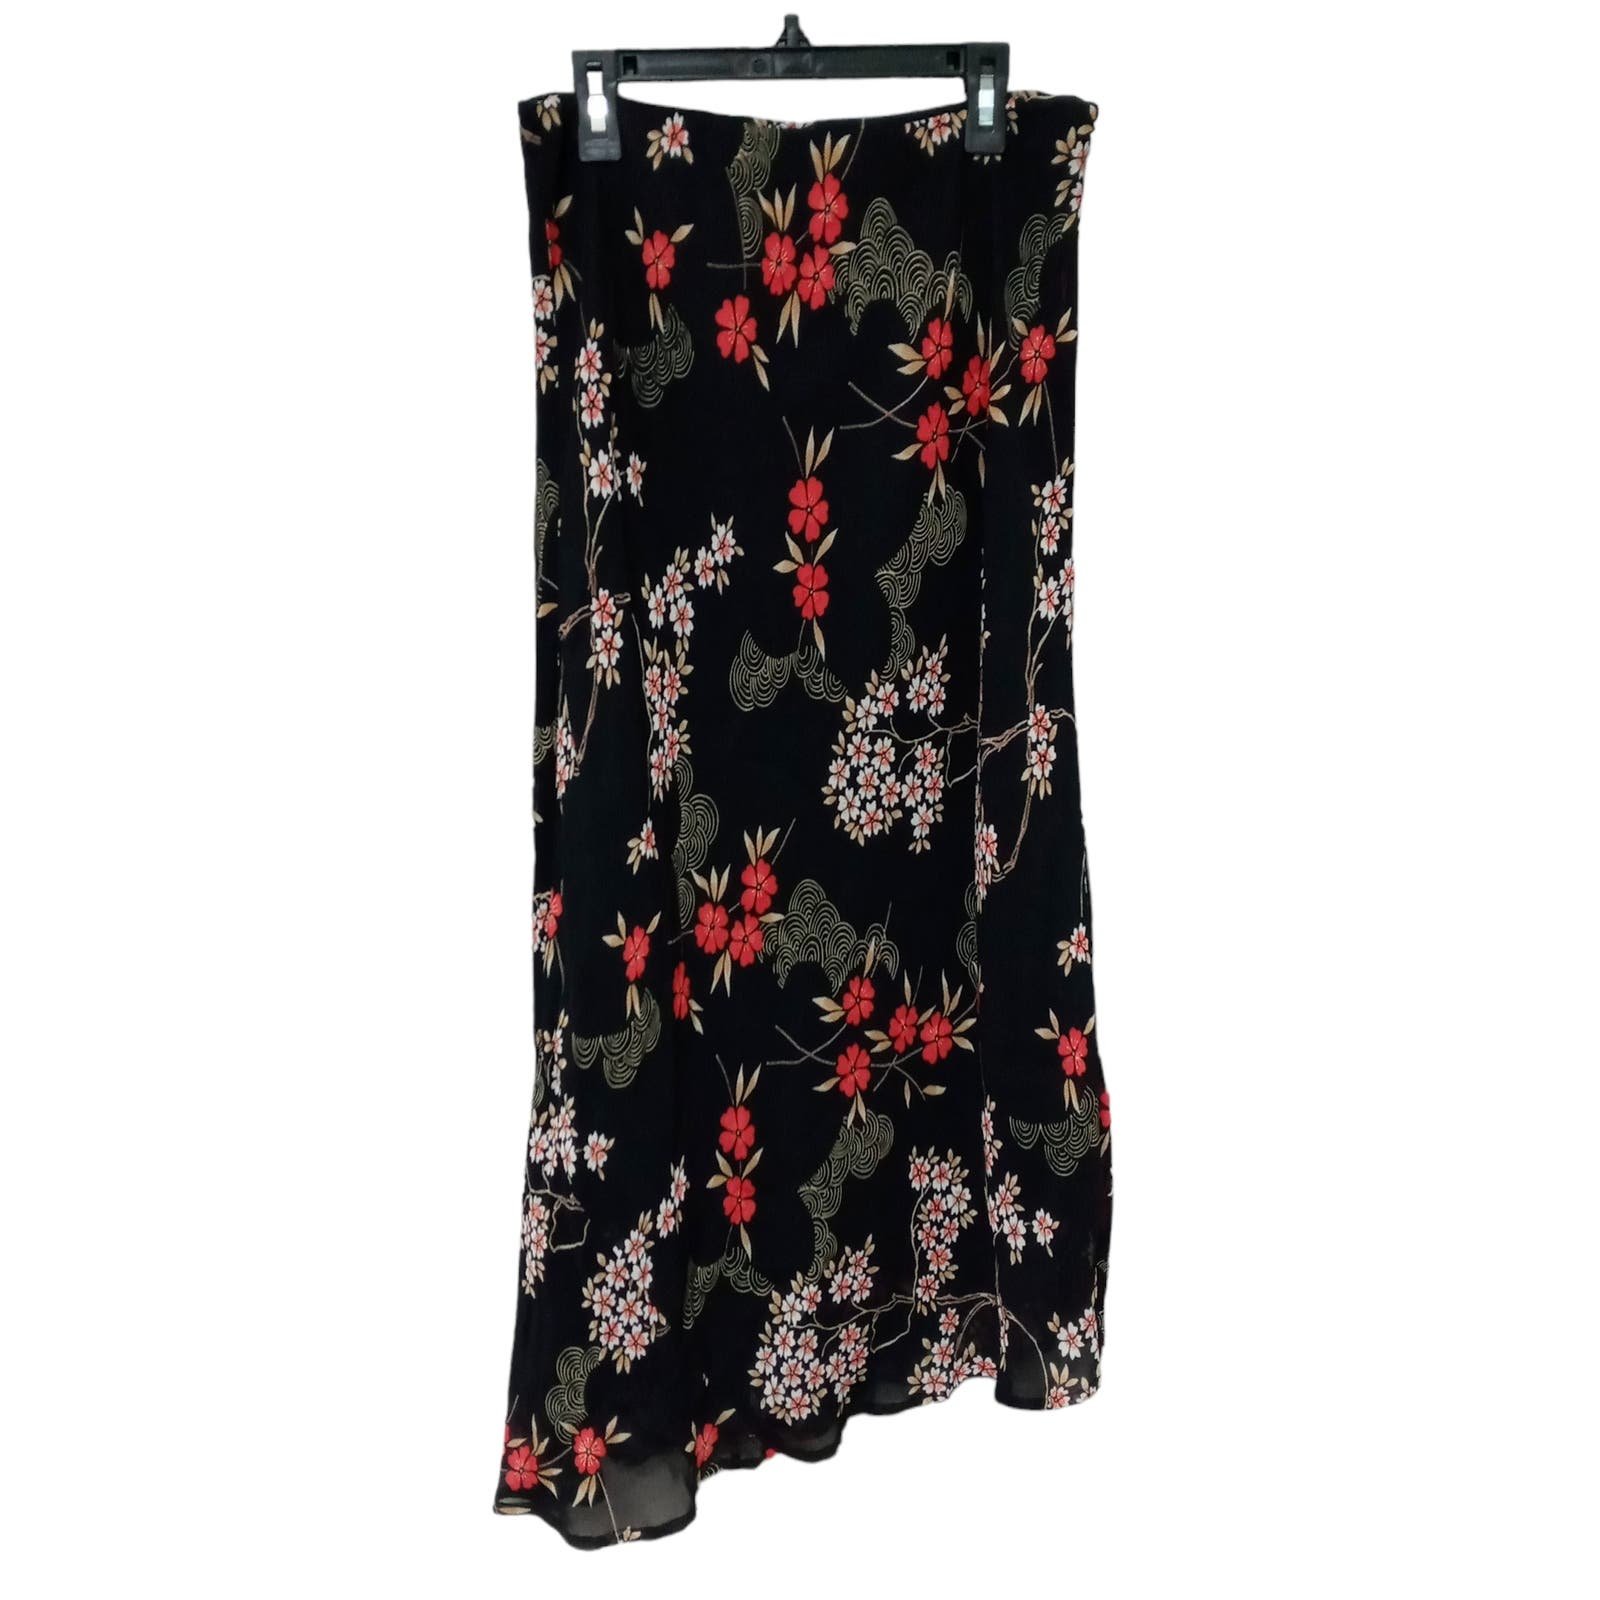 reasonable price Petite Sophisticate Floral Ruffled Asymmetrical Skirt Black Red Coral 10P - hXlFkzghY no tax